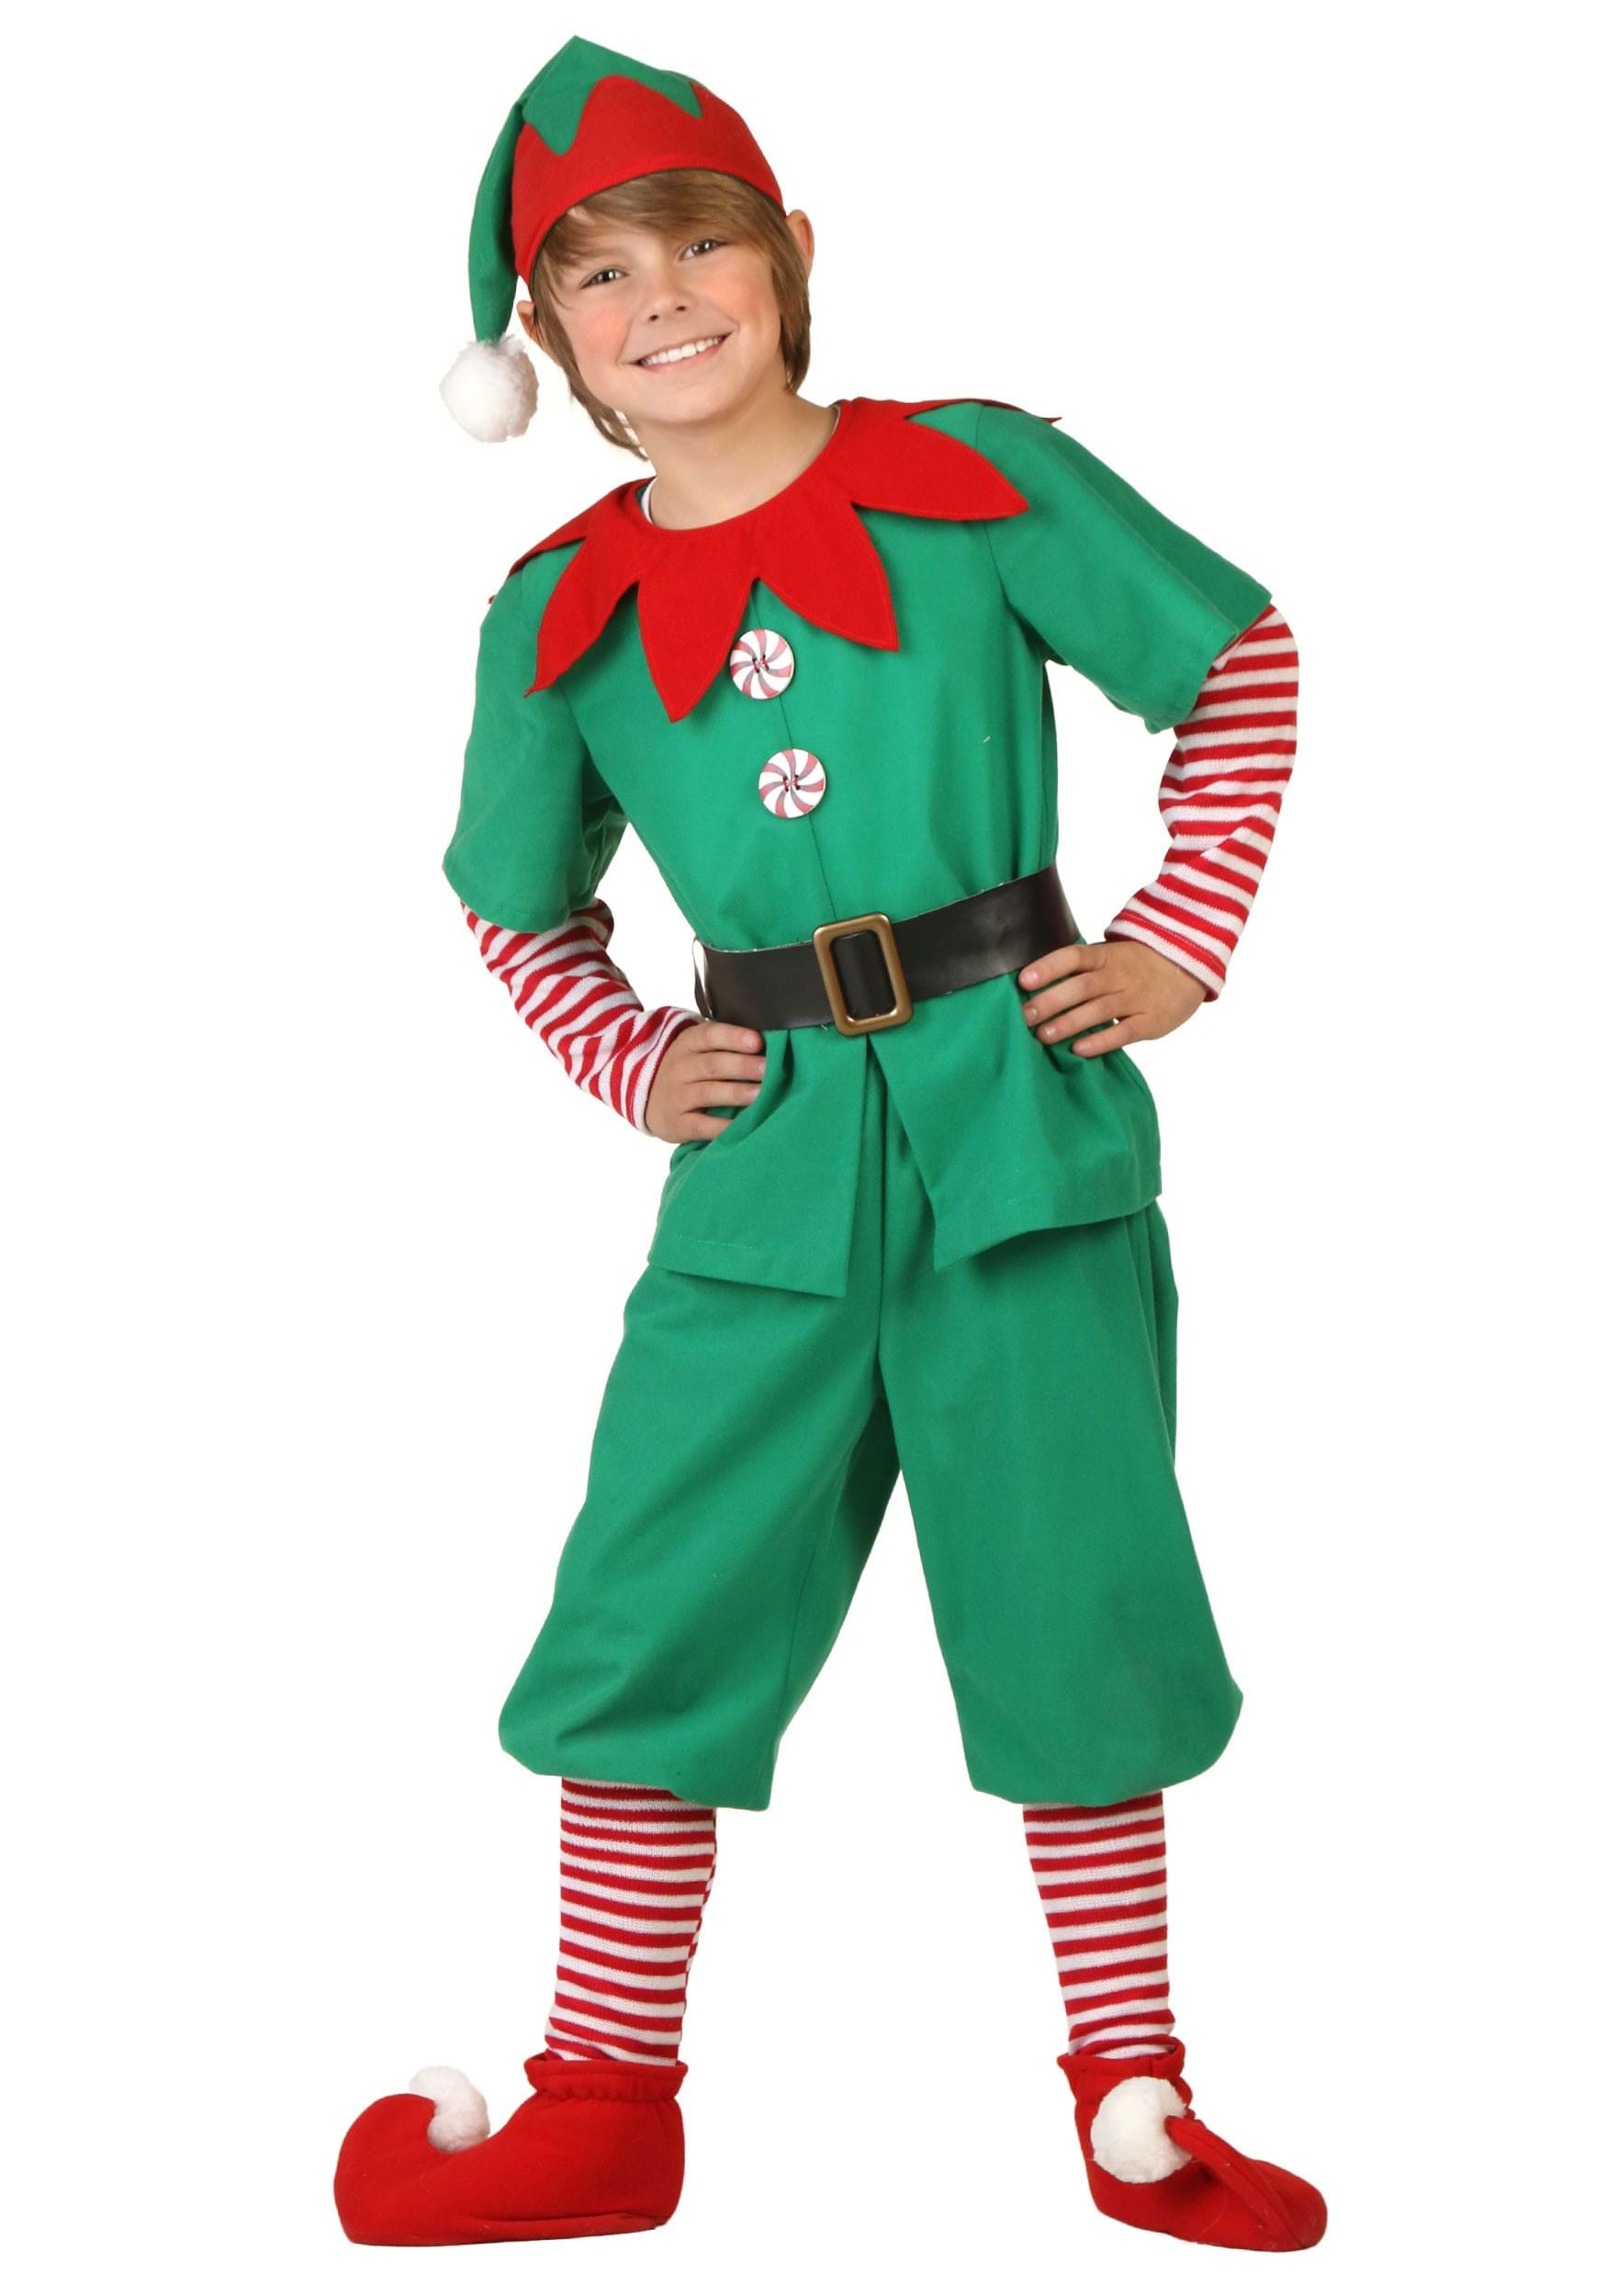 Photos - Fancy Dress Holiday FUN Costumes Elf Costume for Kids | Elf Costumes Green/Red FUN2173CH 